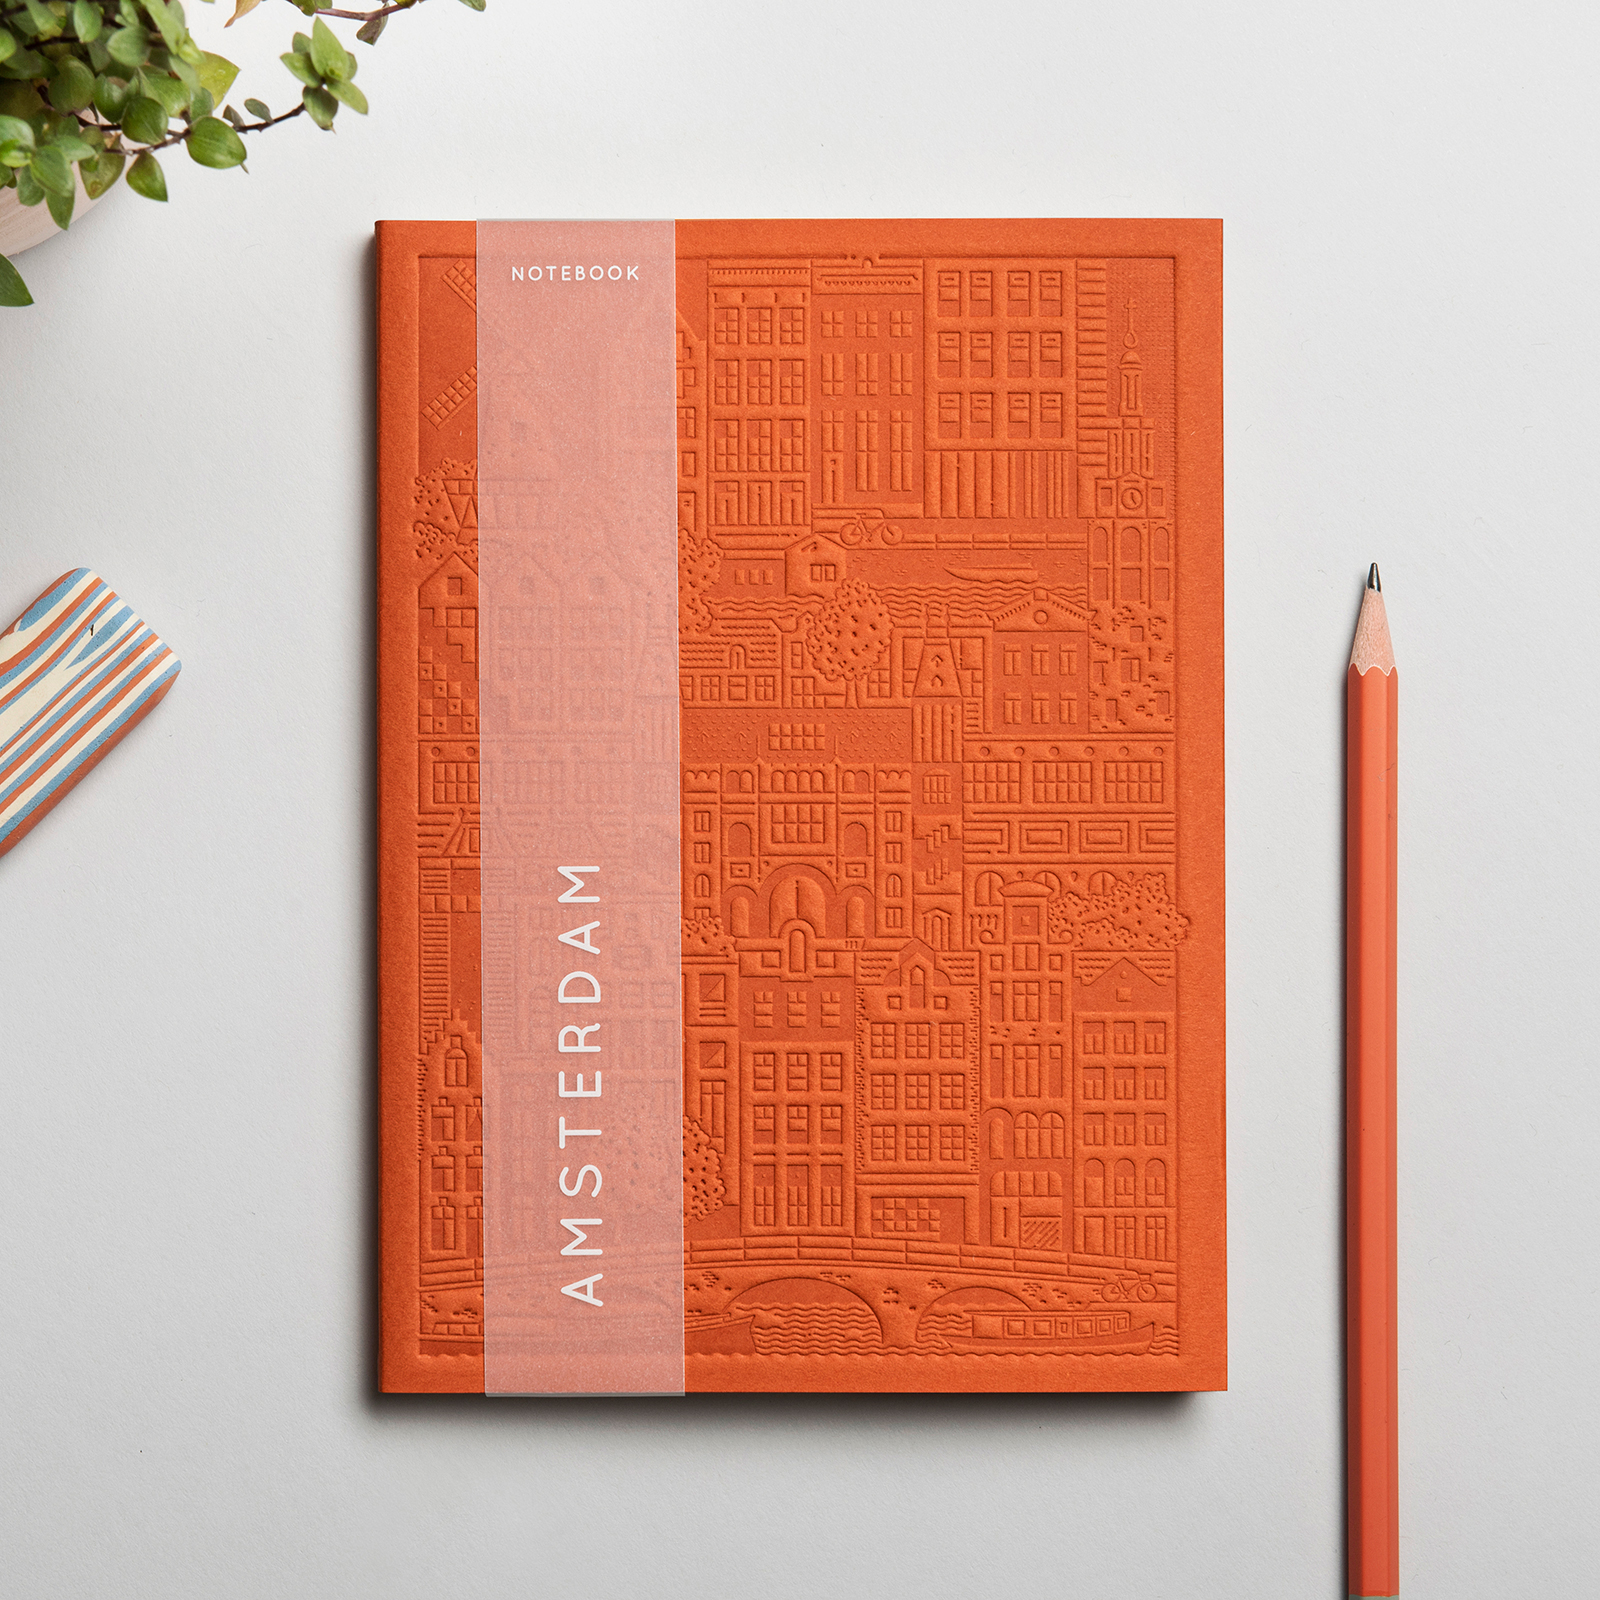 The Amsterdam Notebook by The City Works